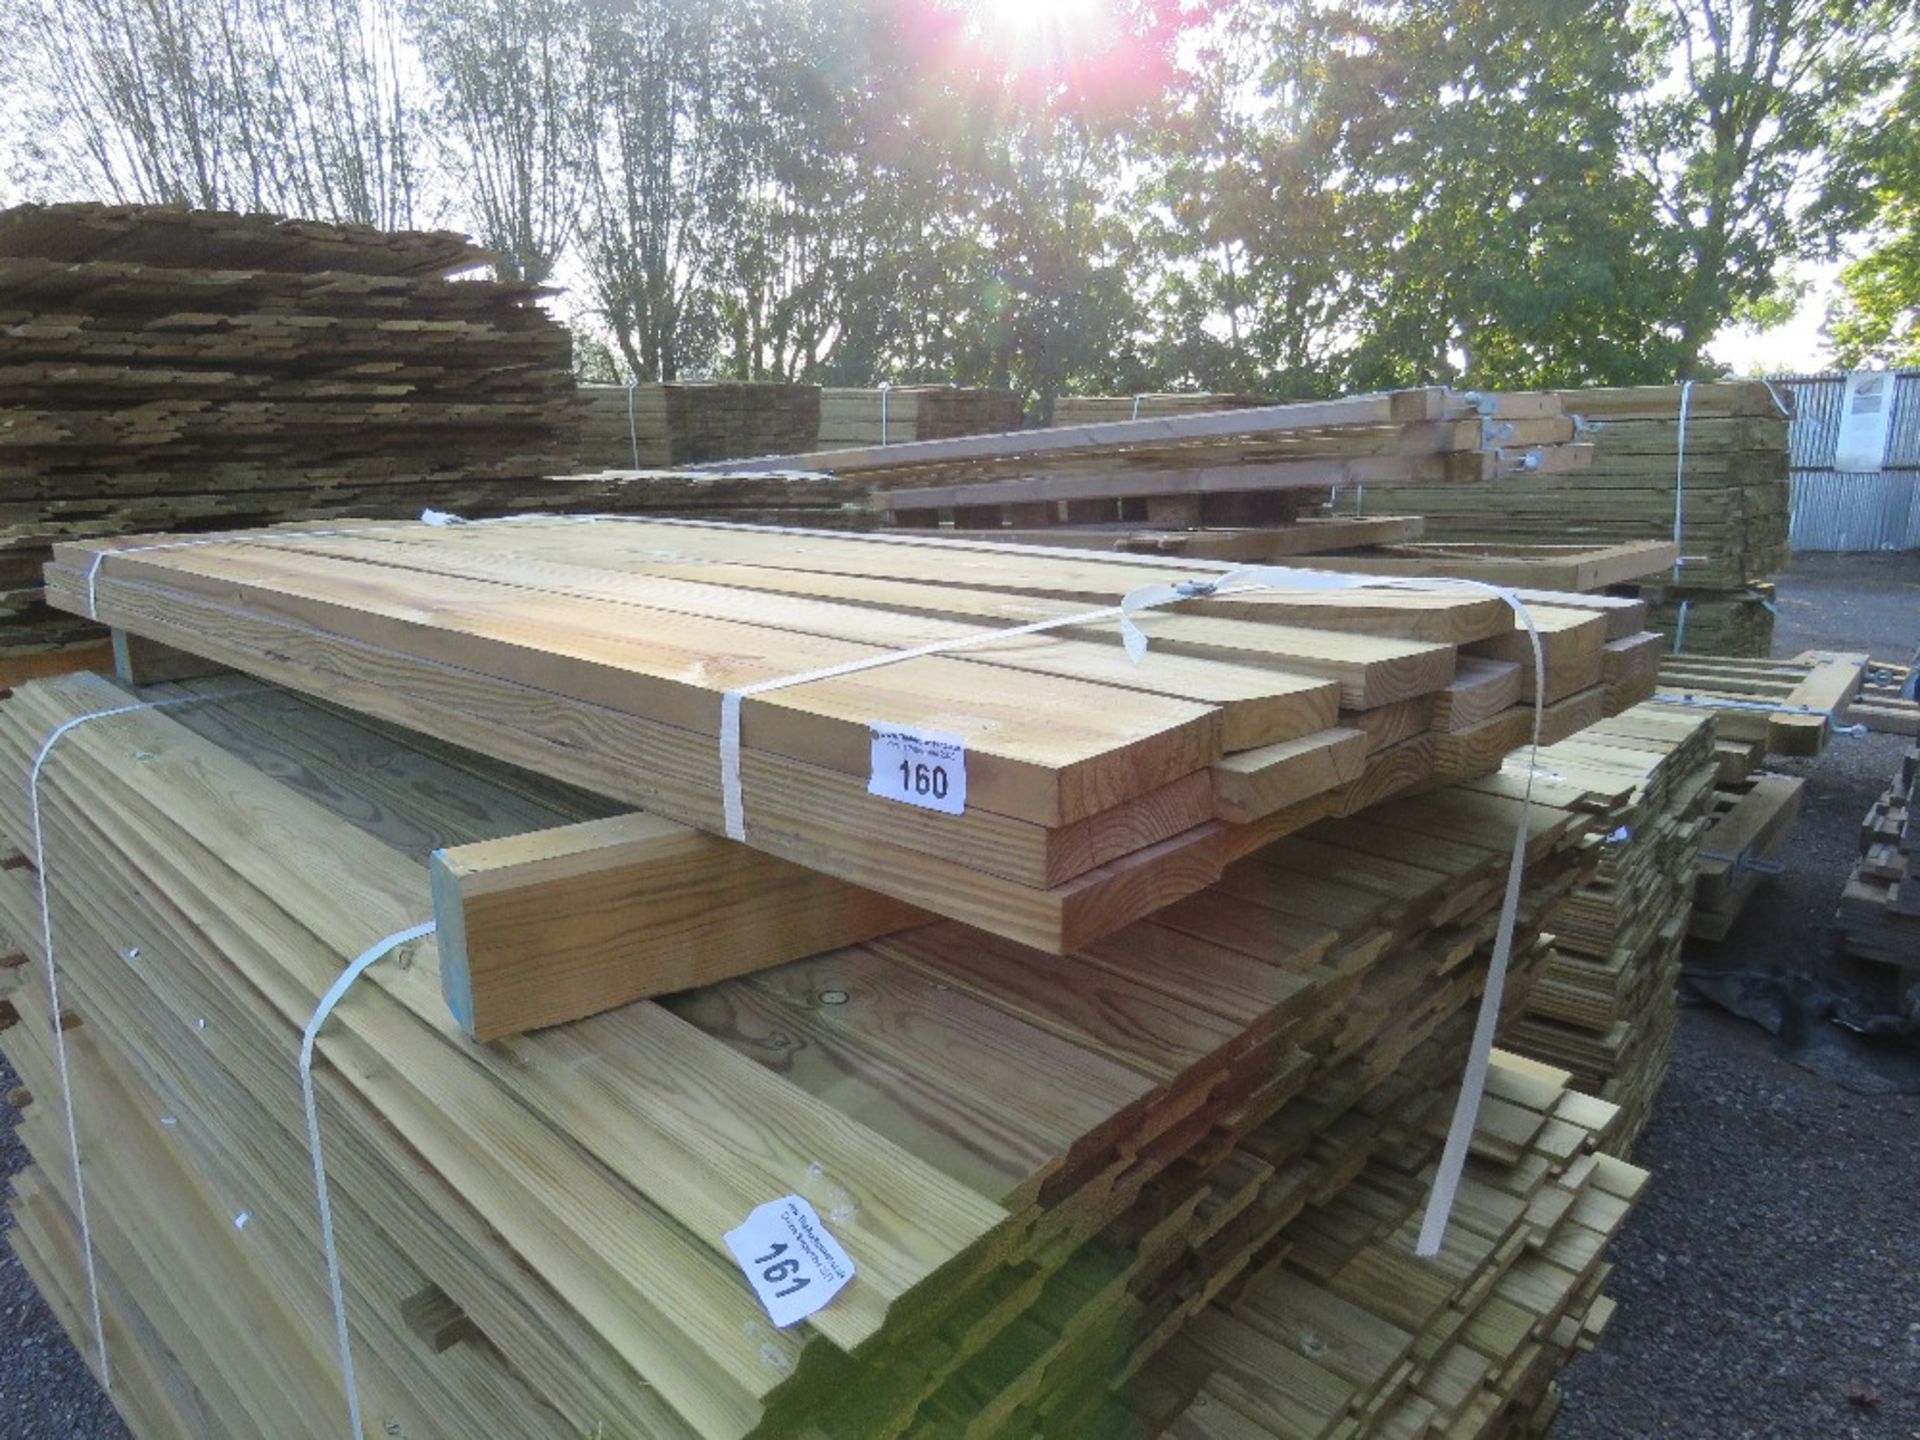 SMALL BUNDLE OF PRESSURE TREATED TIMBER BOARDS 1.83M X 140MM X 30MM APPROX.